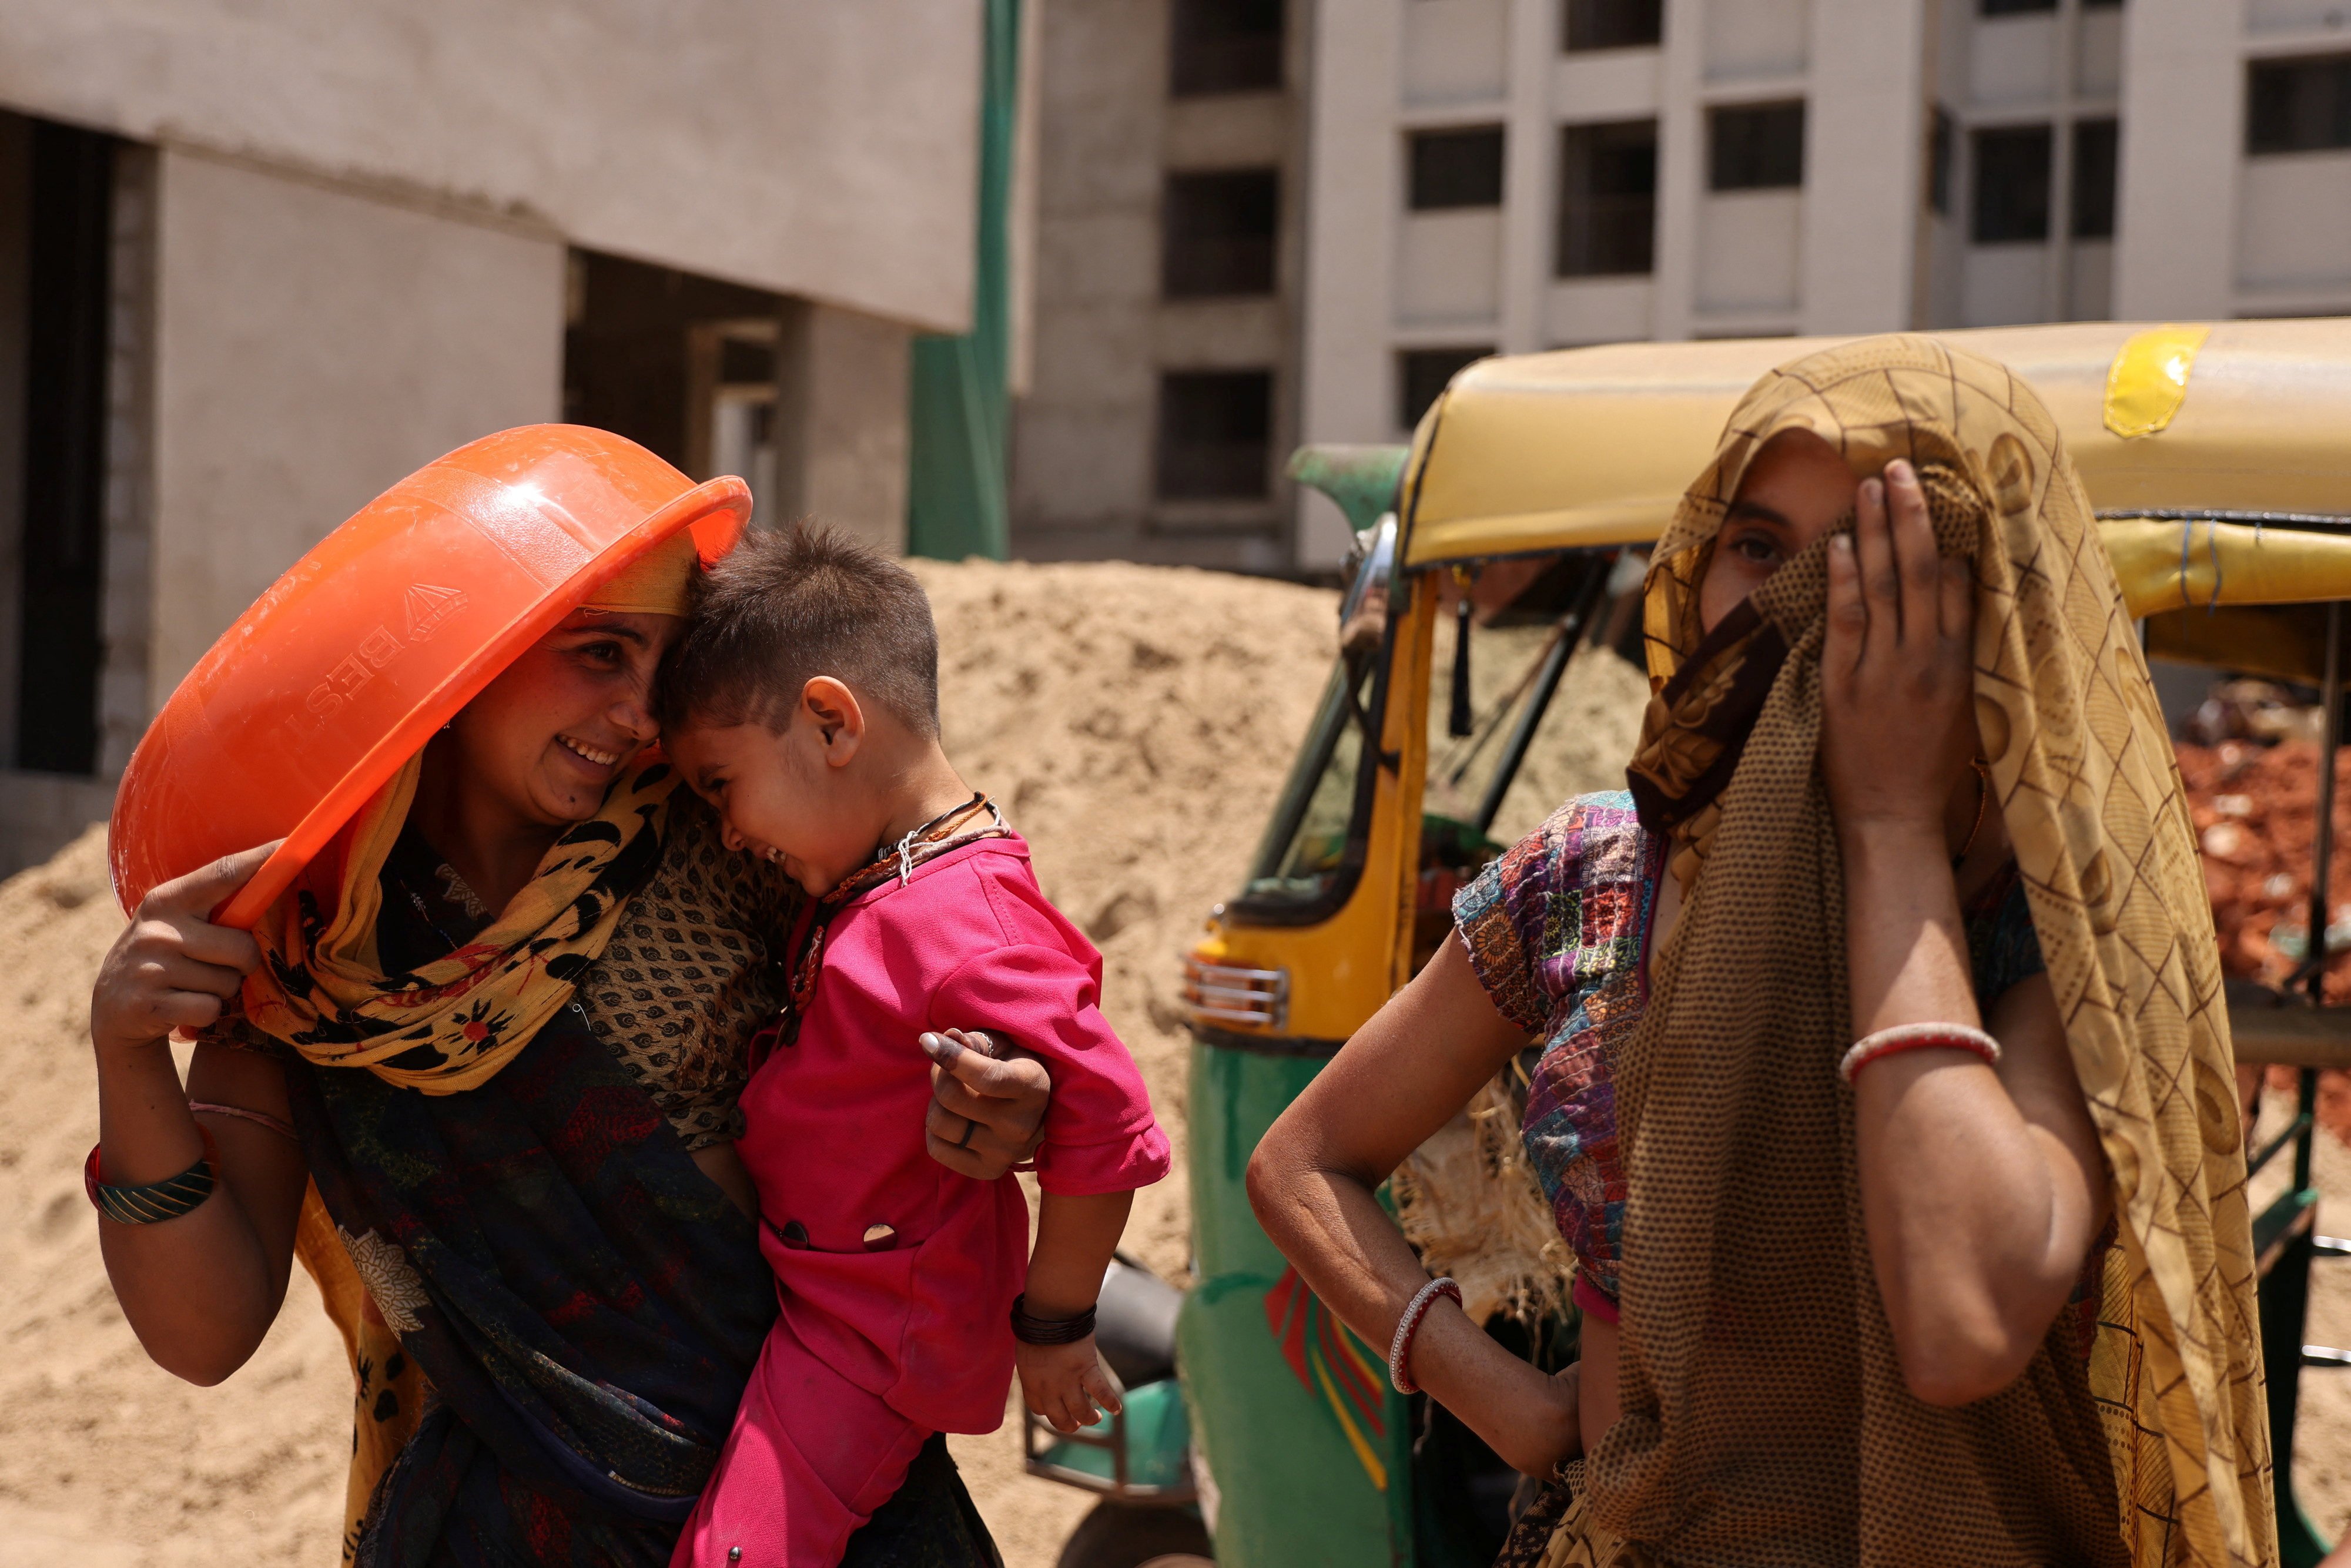 Women take shelter from the sun at a construction site in Ahmedabad, India, on April 28. Photo: Reuters